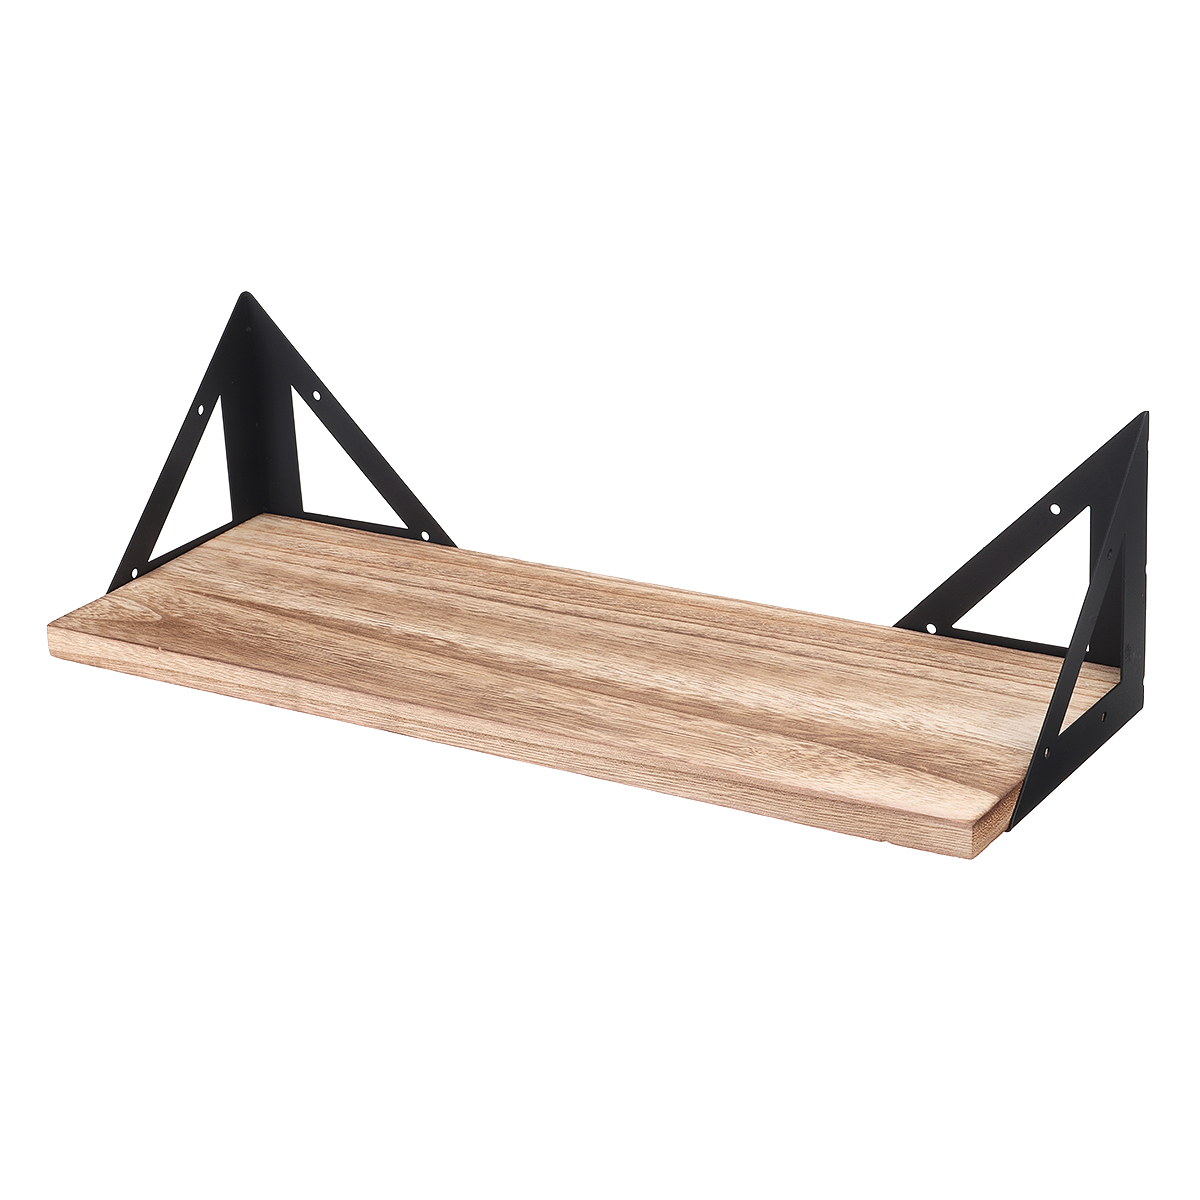 Find 3Pcs Wall Floating Shelves Shelf Rack with 3 Wood Boards Dispaly Home Decor for Sale on Gipsybee.com with cryptocurrencies